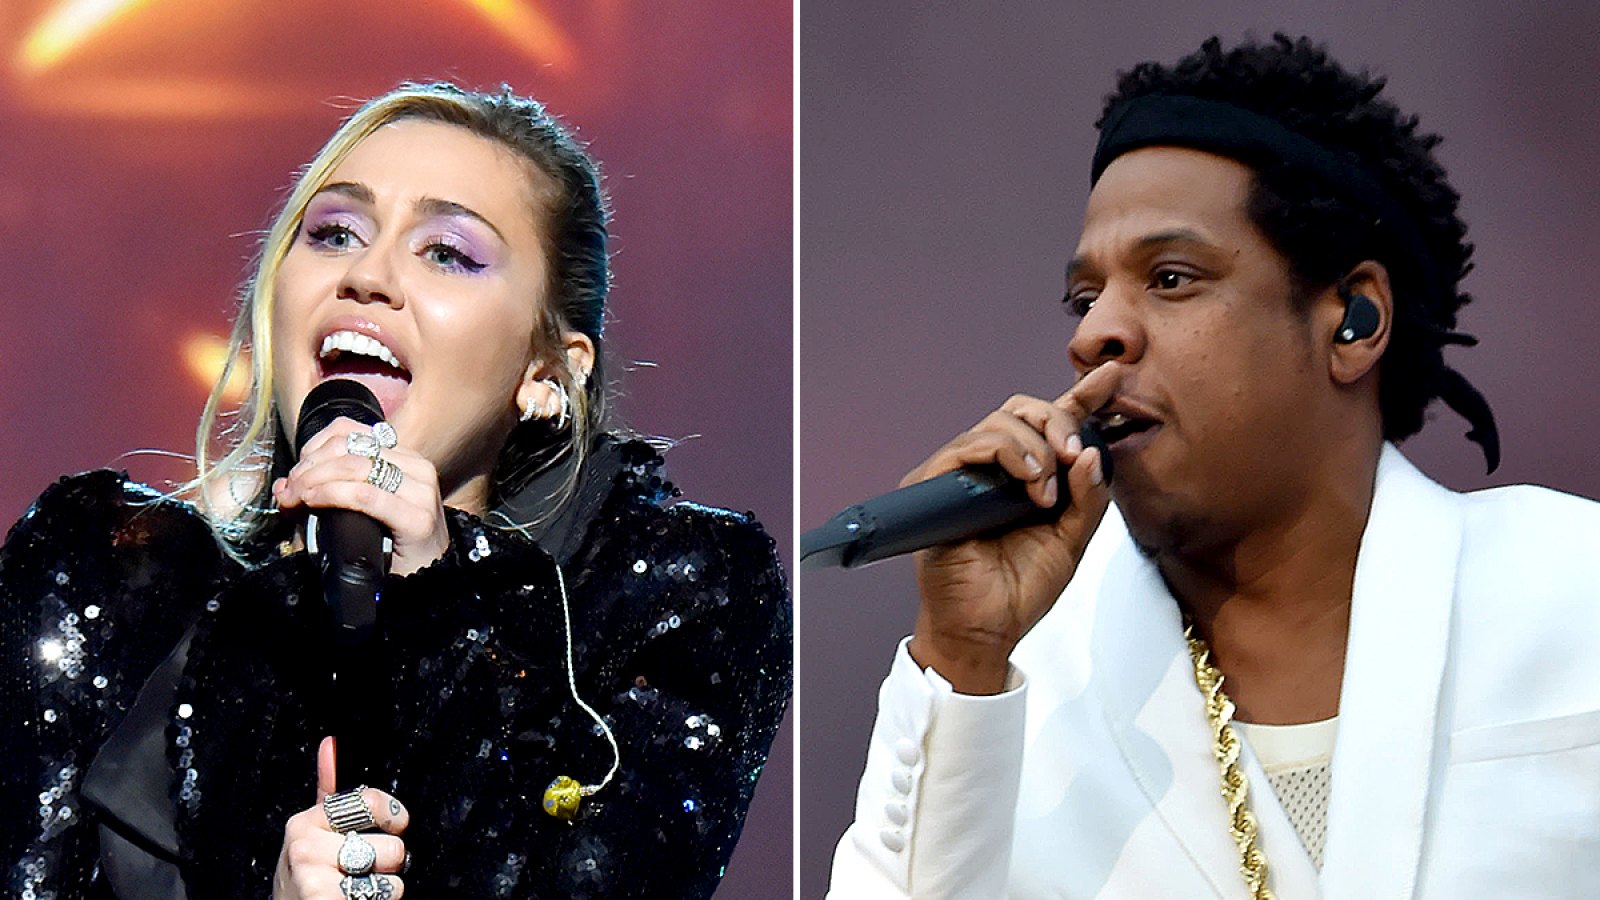 Miley-Cyrus-and-Jay-Z-Are-Among-the-Woodstock-2019-Headliners